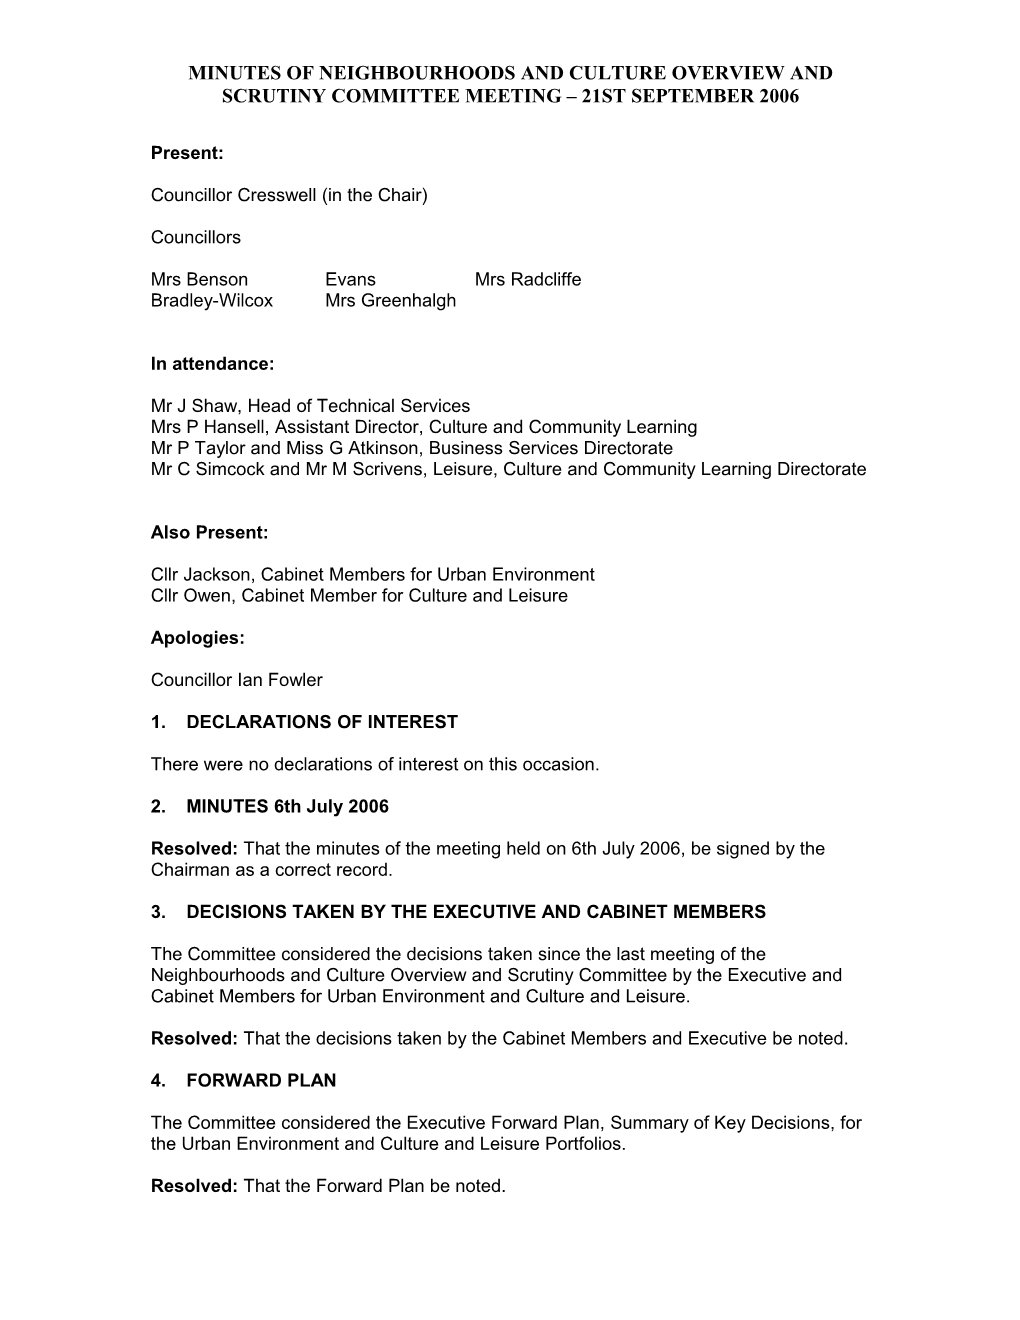 Minutes of Neighbourhoods and Culture Overview and Scrutiny Committee Meeting 21St September